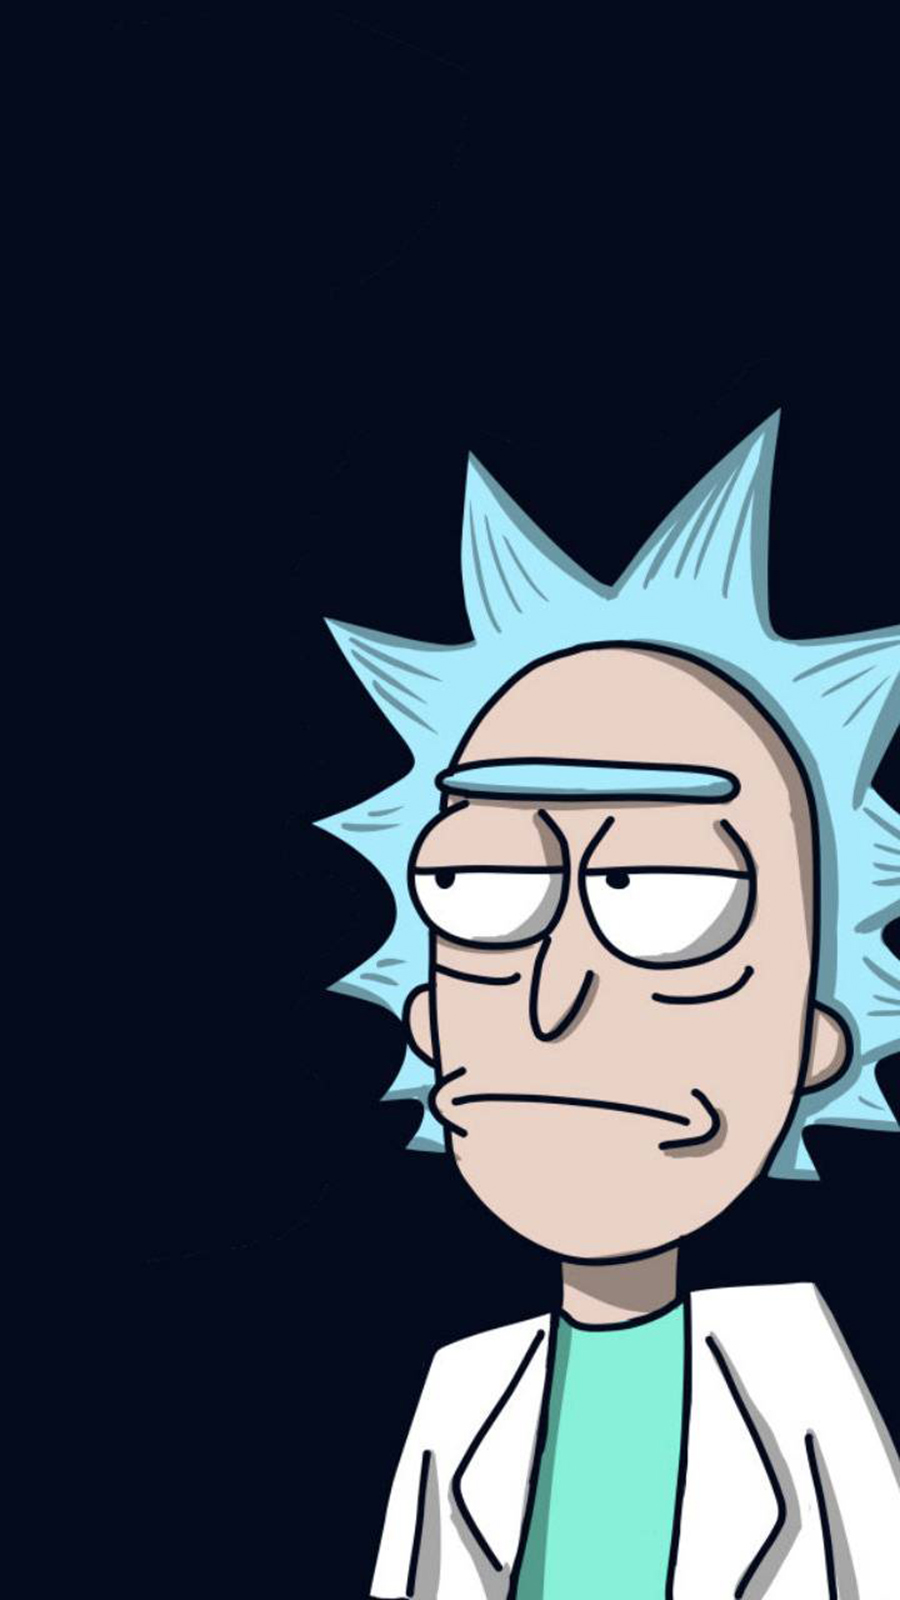 Rick & Morty Wallpaper Free Download For Your Device